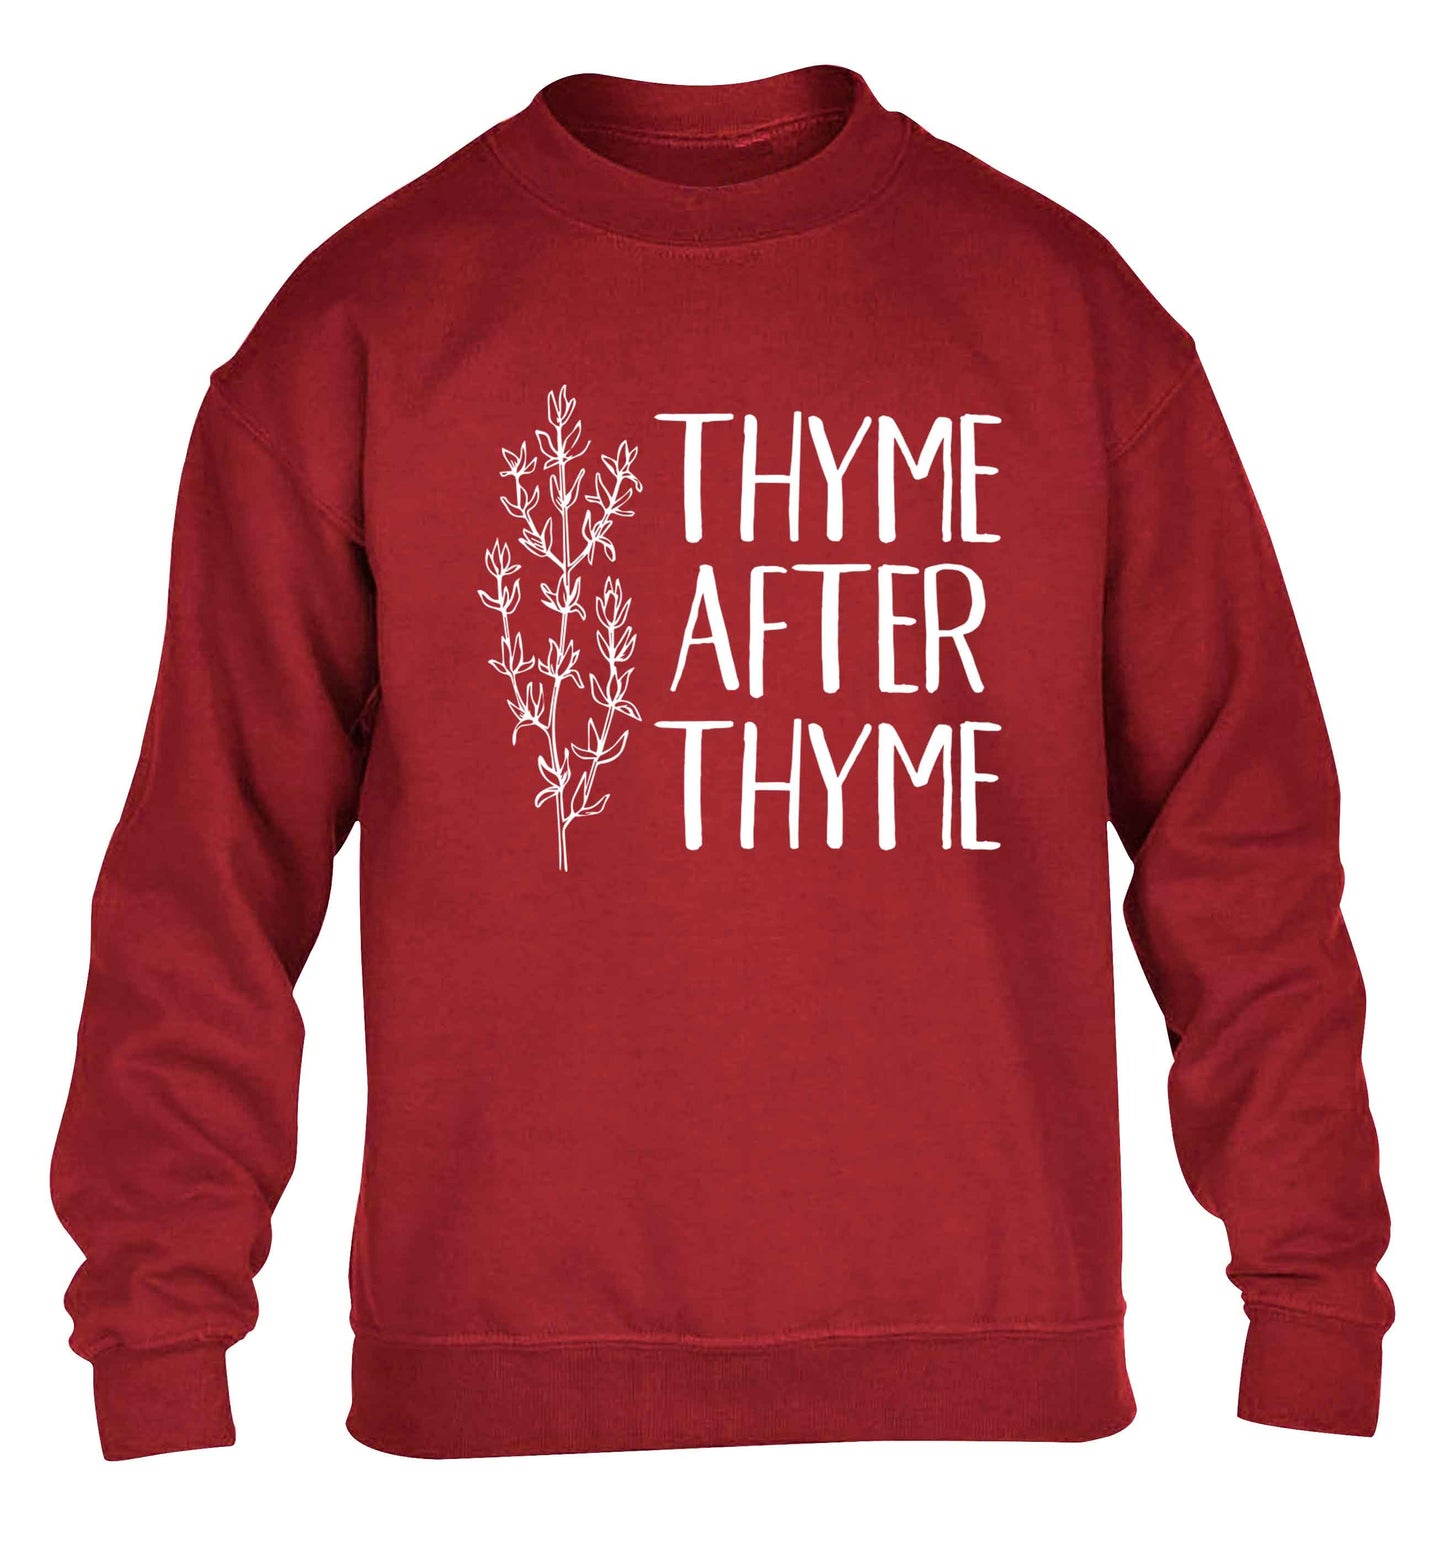 Thyme after thyme children's grey sweater 12-13 Years